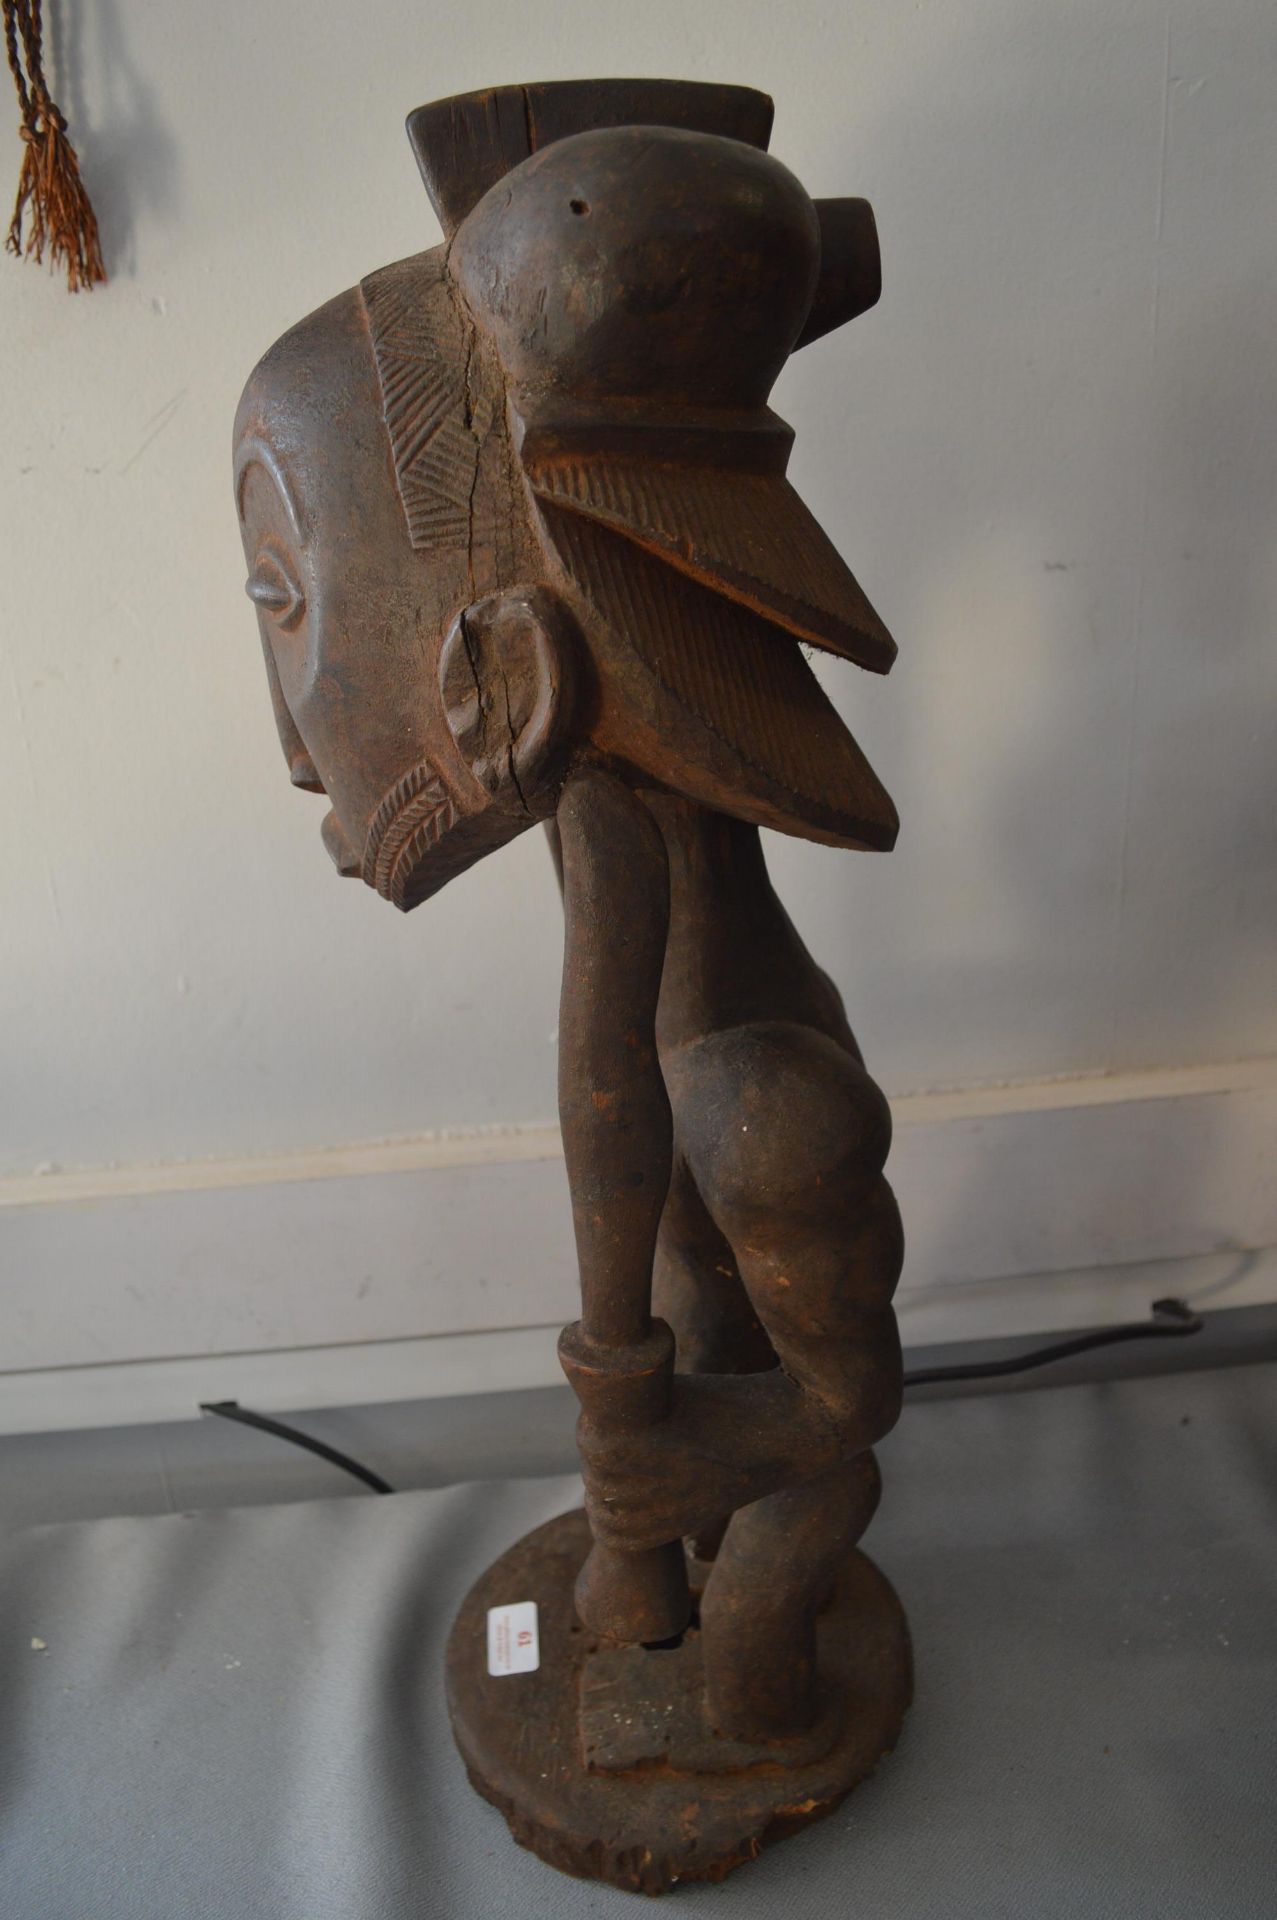 Luba Carved Wooden Male Tribal Fertility Figure - Image 4 of 4